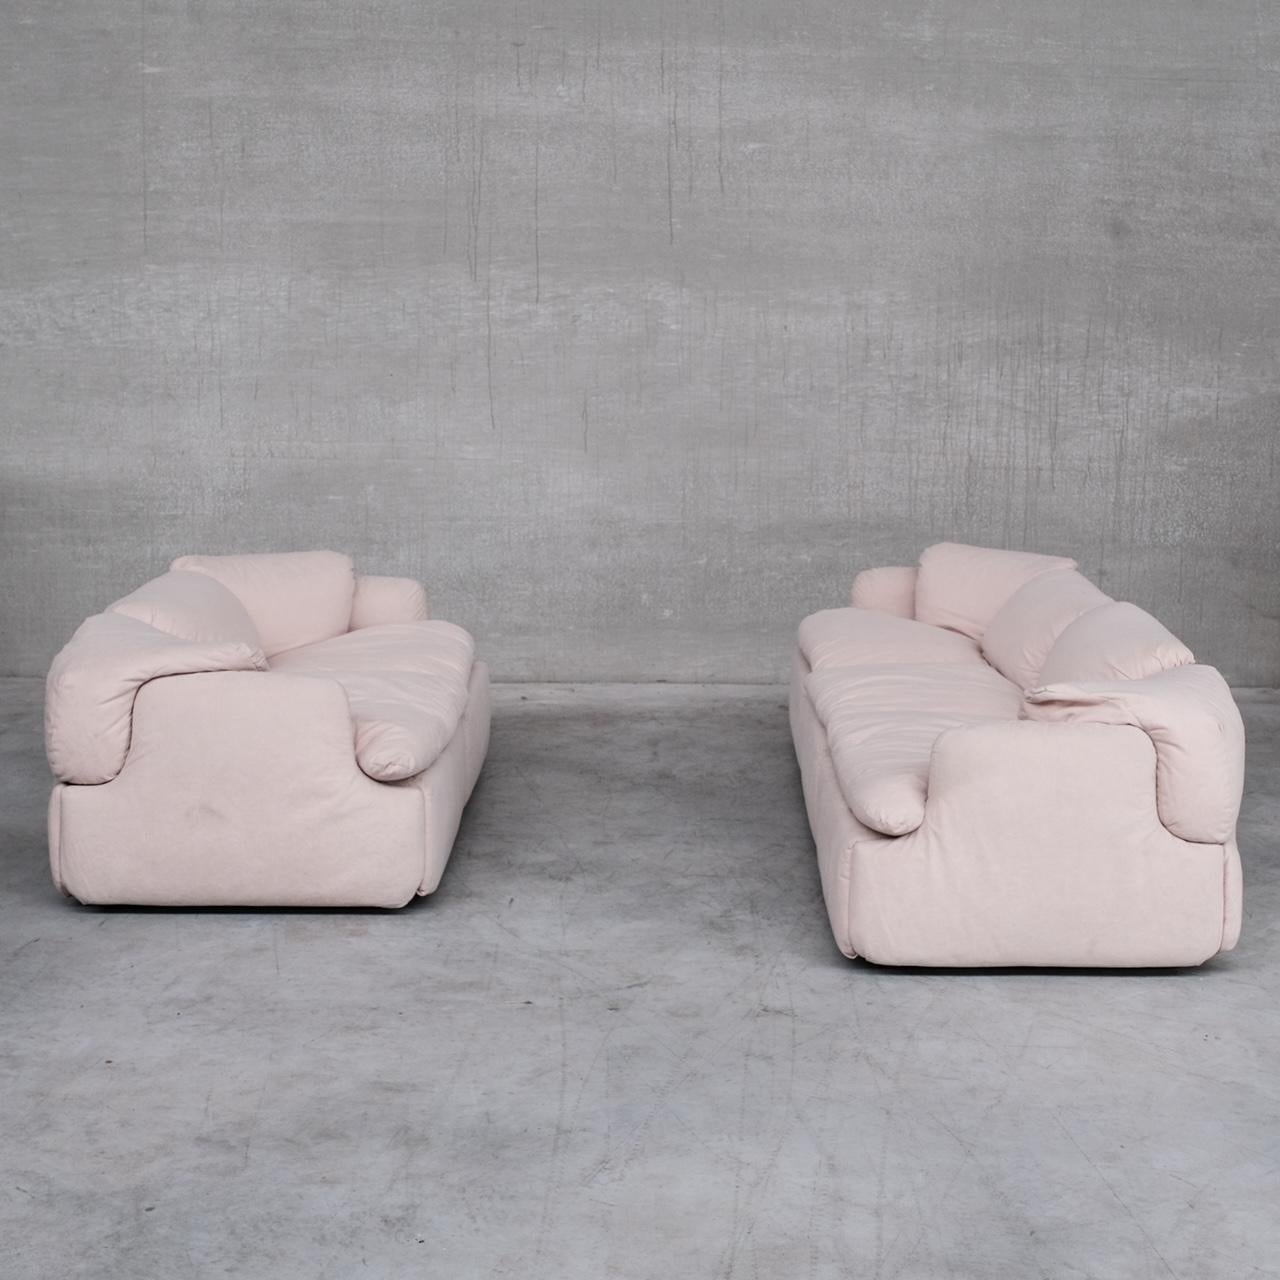 A three seater sofa, by Alberto Rosselli for Saporiti. 

The confidential model. 

Italy, c1972.

Original off white fabric upholstery has been cleaned and retained, it remains in very good condition. 

We have a matching two seater